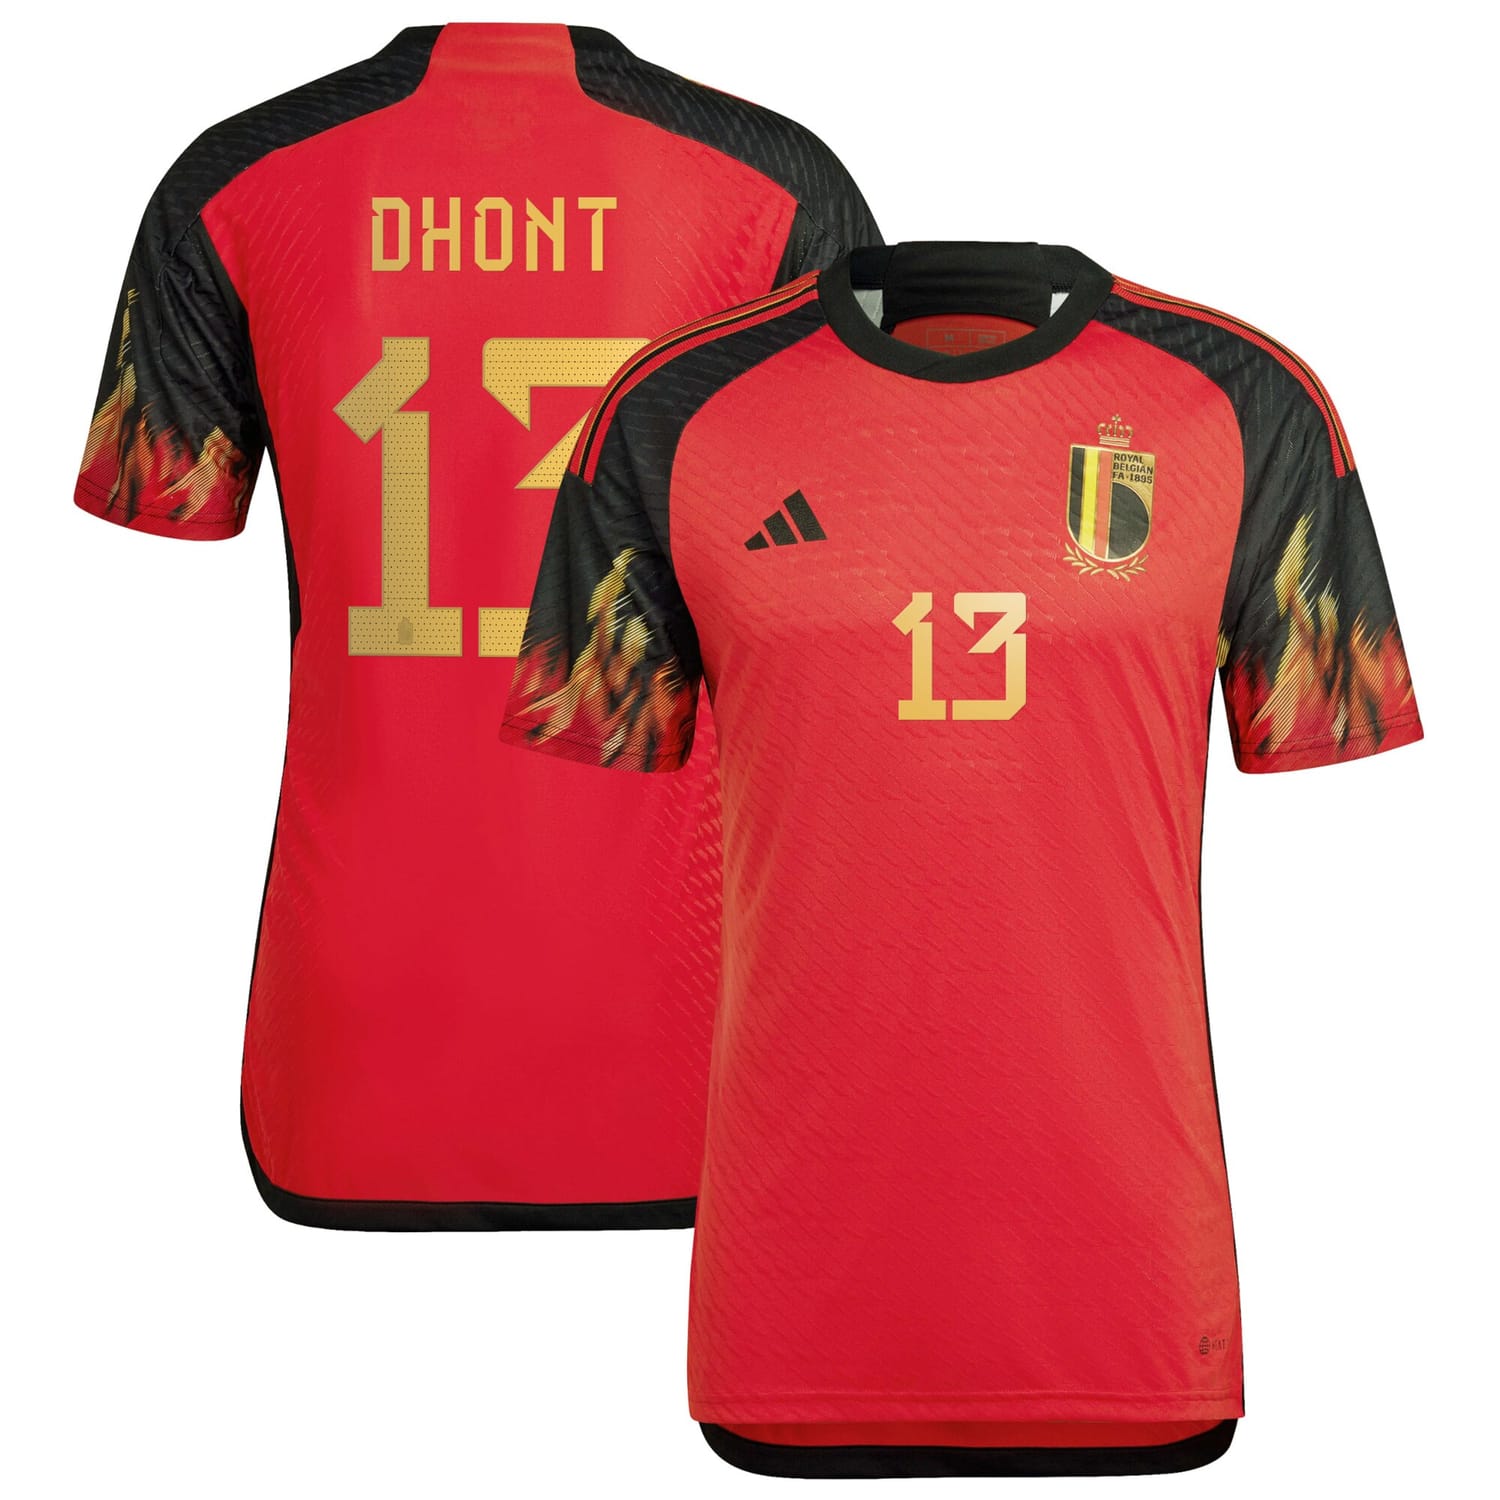 Belgium National Team Home Authentic Jersey Shirt 2022 player Elena Dhont 13 printing for Men